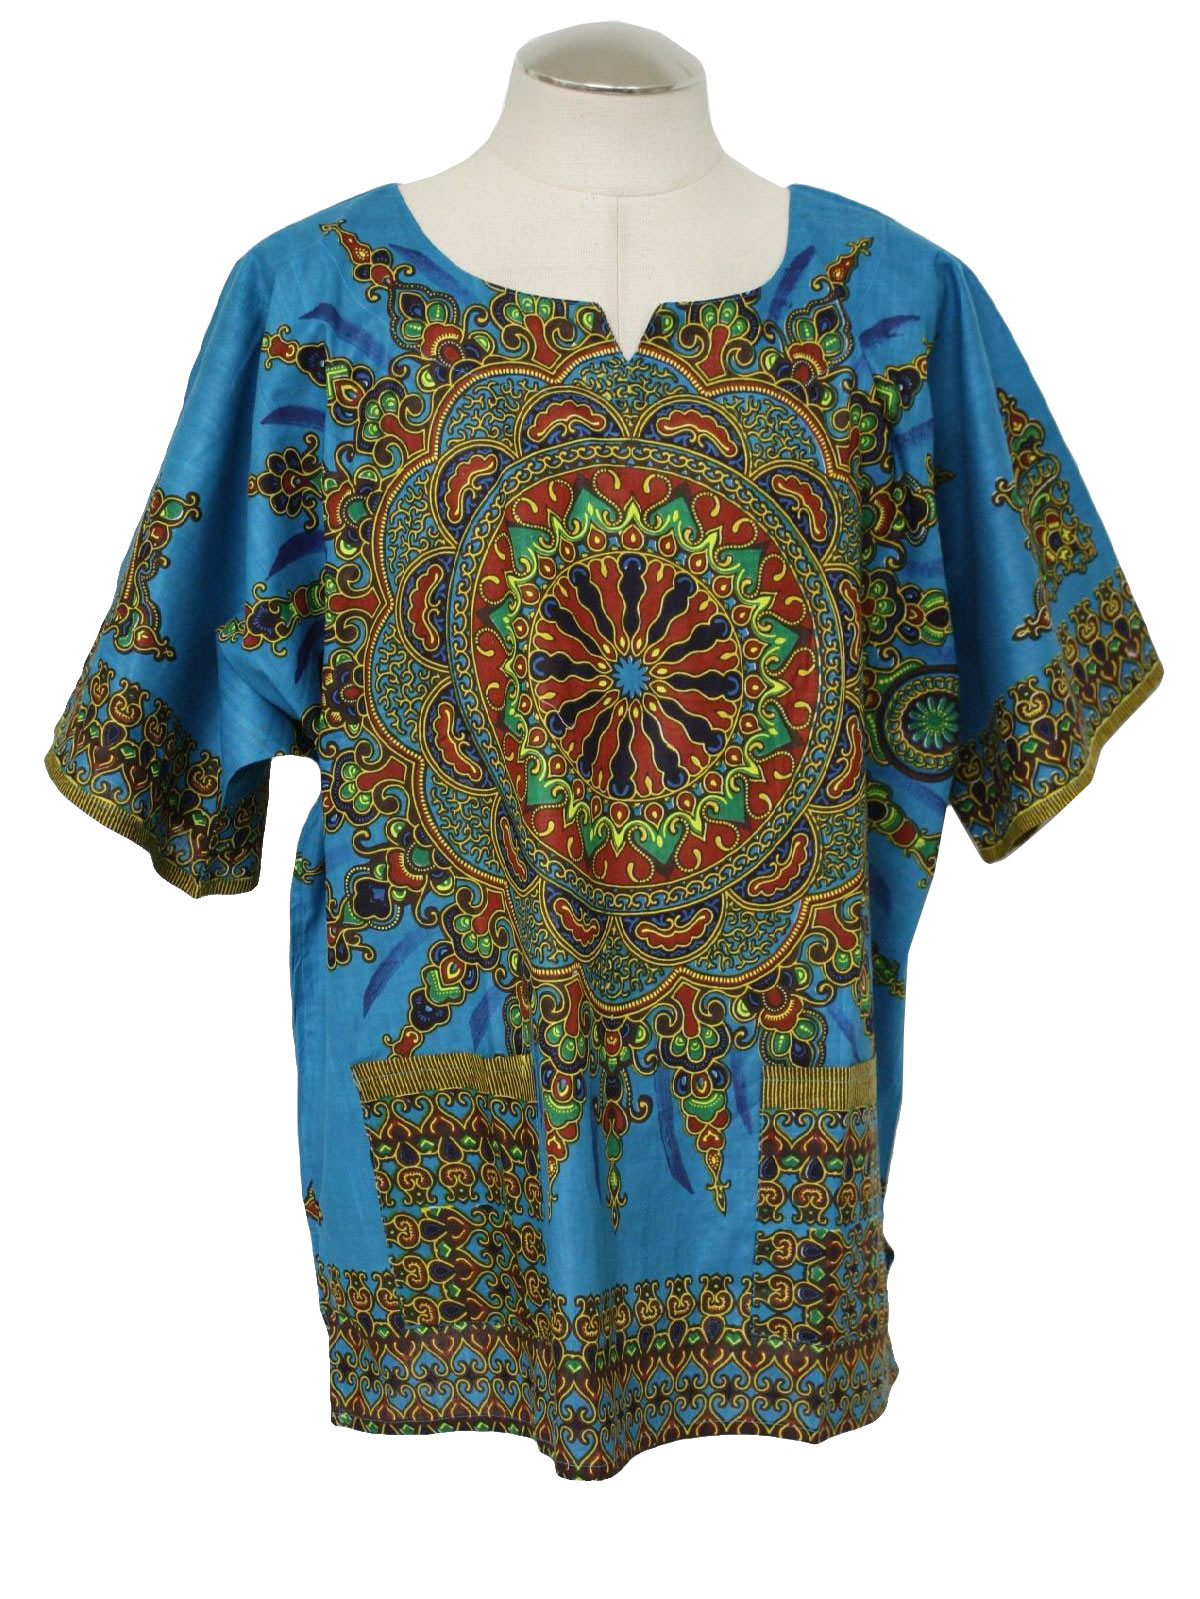 Vintage 70s Dashiki Shirt: 70s reproduction (made new recently) -Funky ...